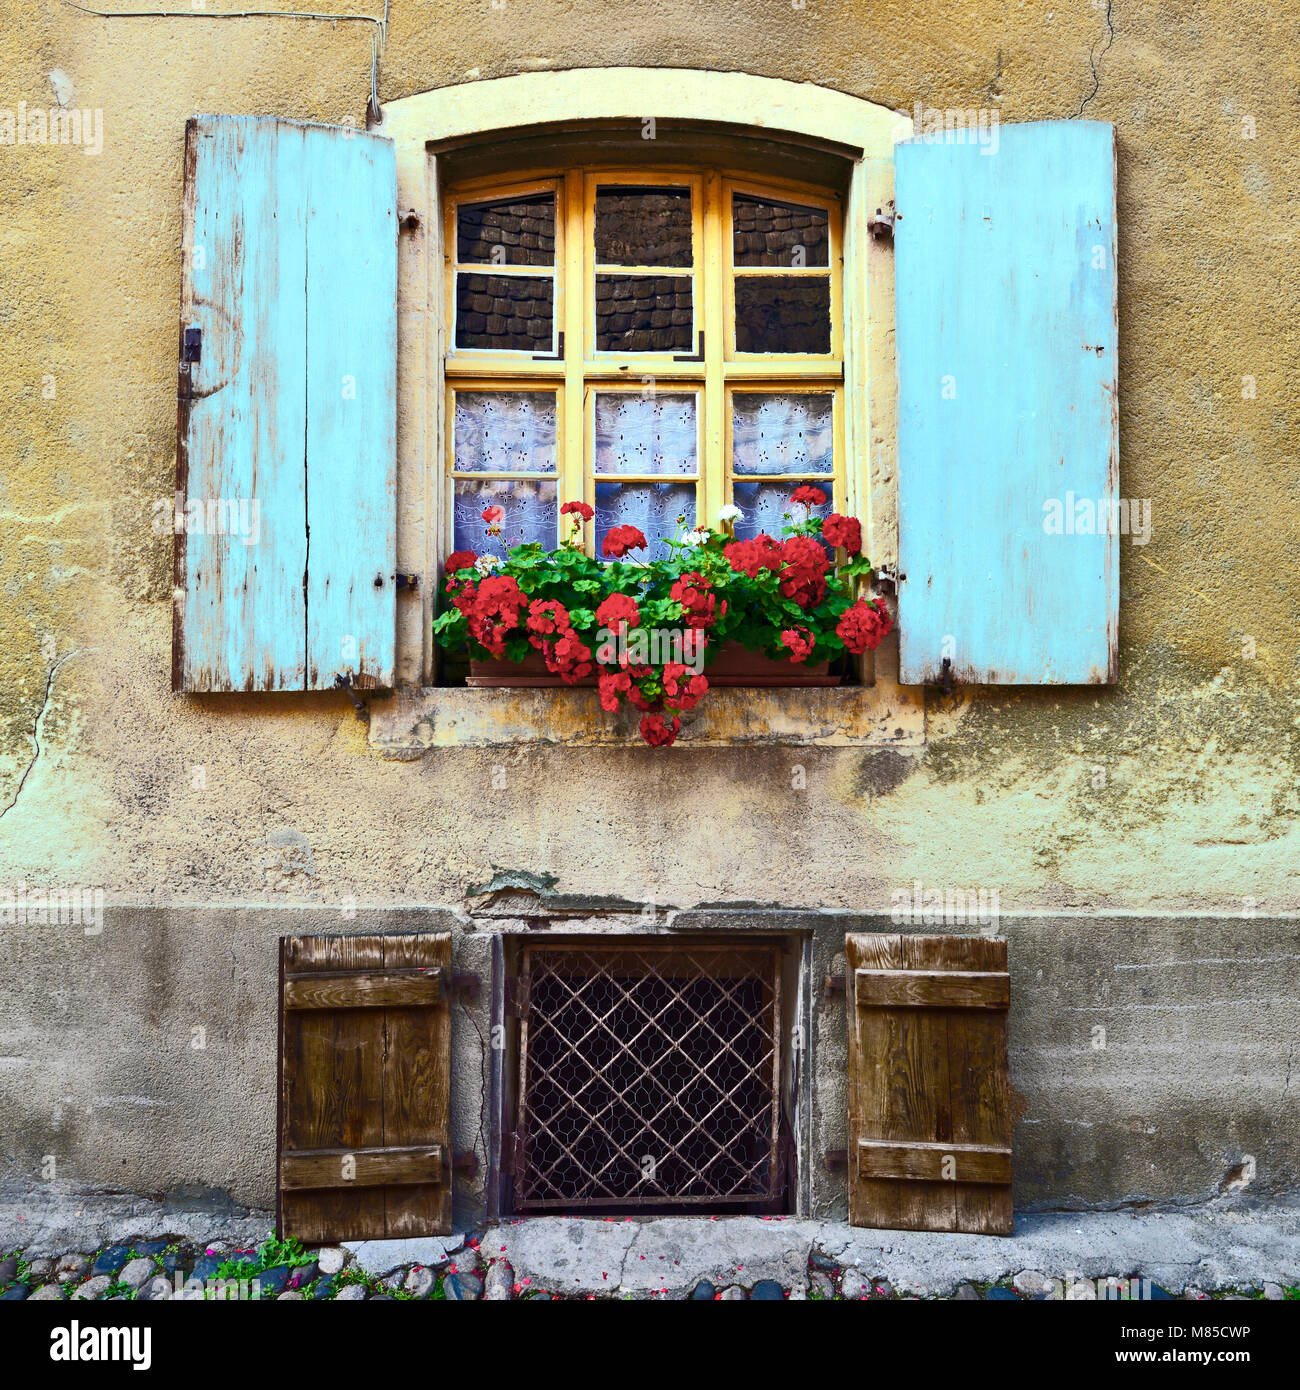 Painted shutters and a window box add a splash of colour to a medieval house in Eguisheim, Alsace, France. Stock Photo